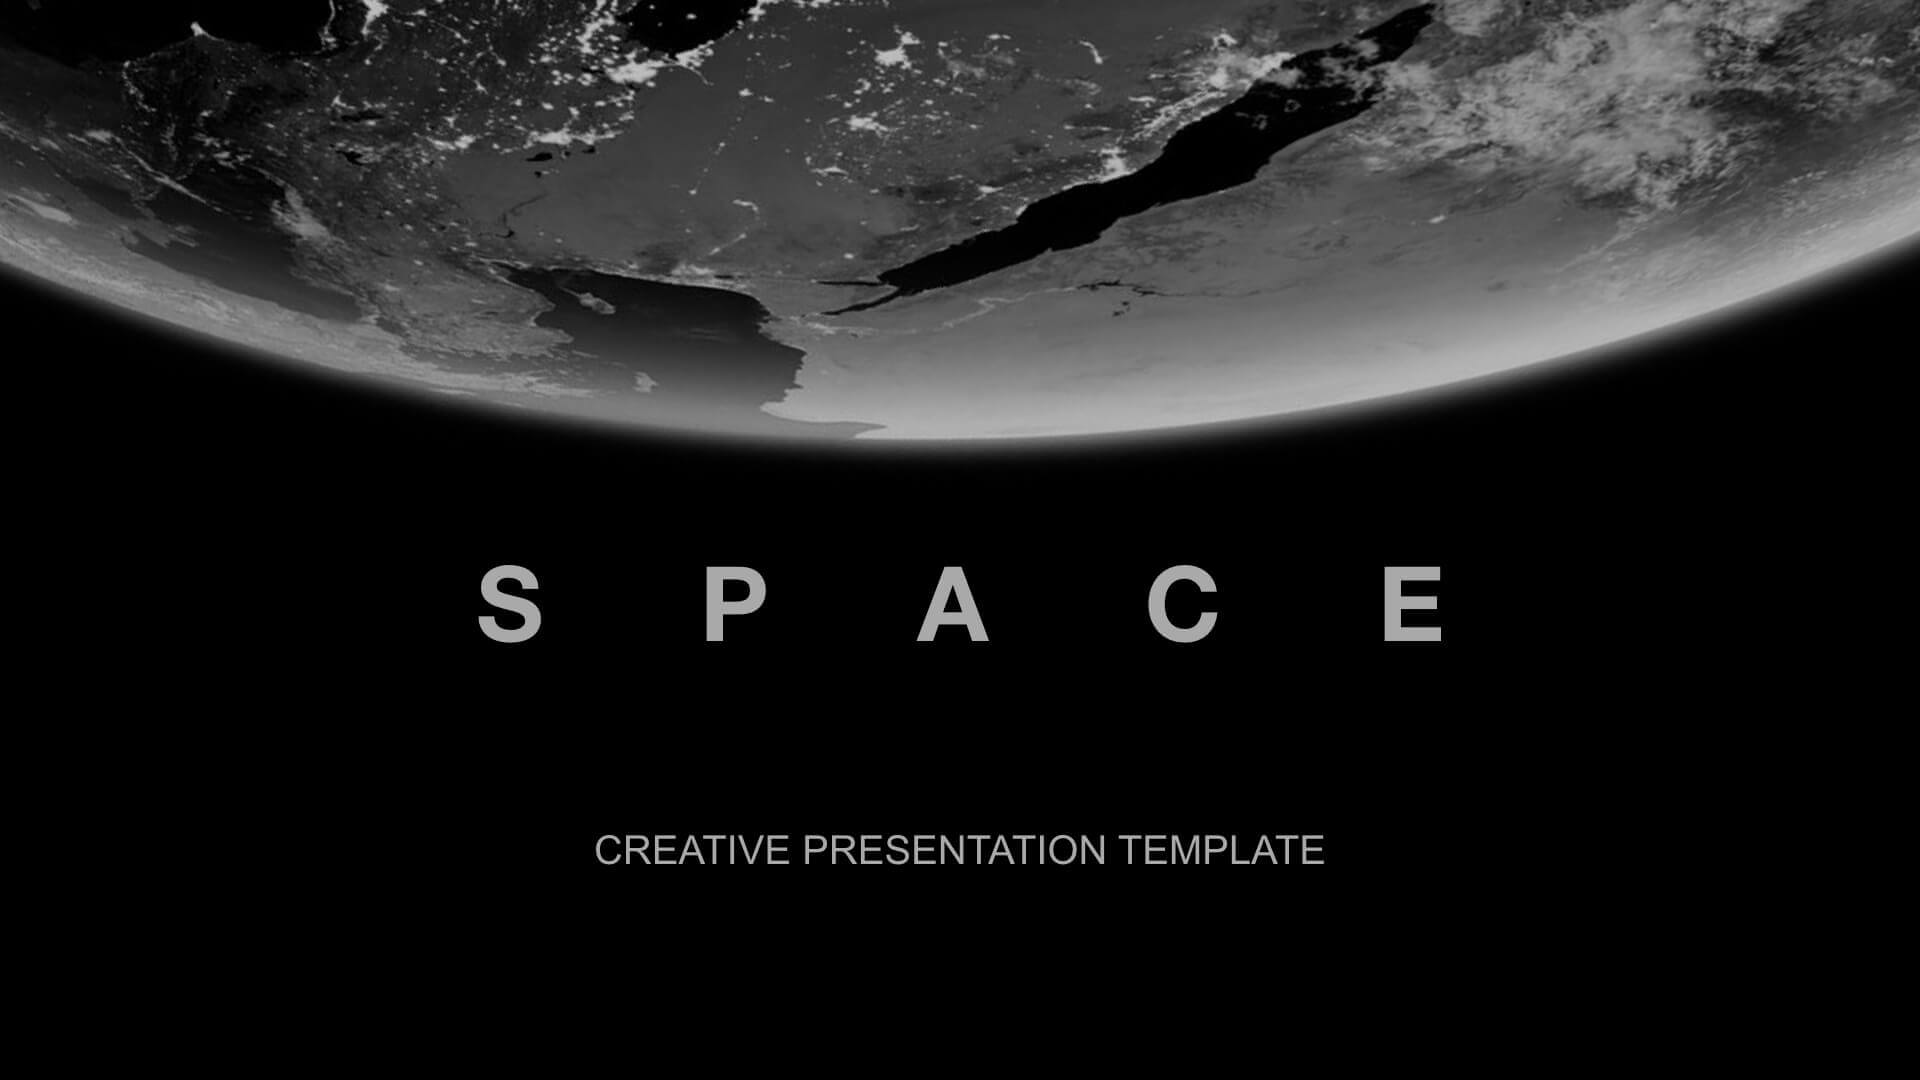 Free Space Universe Presentation Template for Keynote and PowerPoint